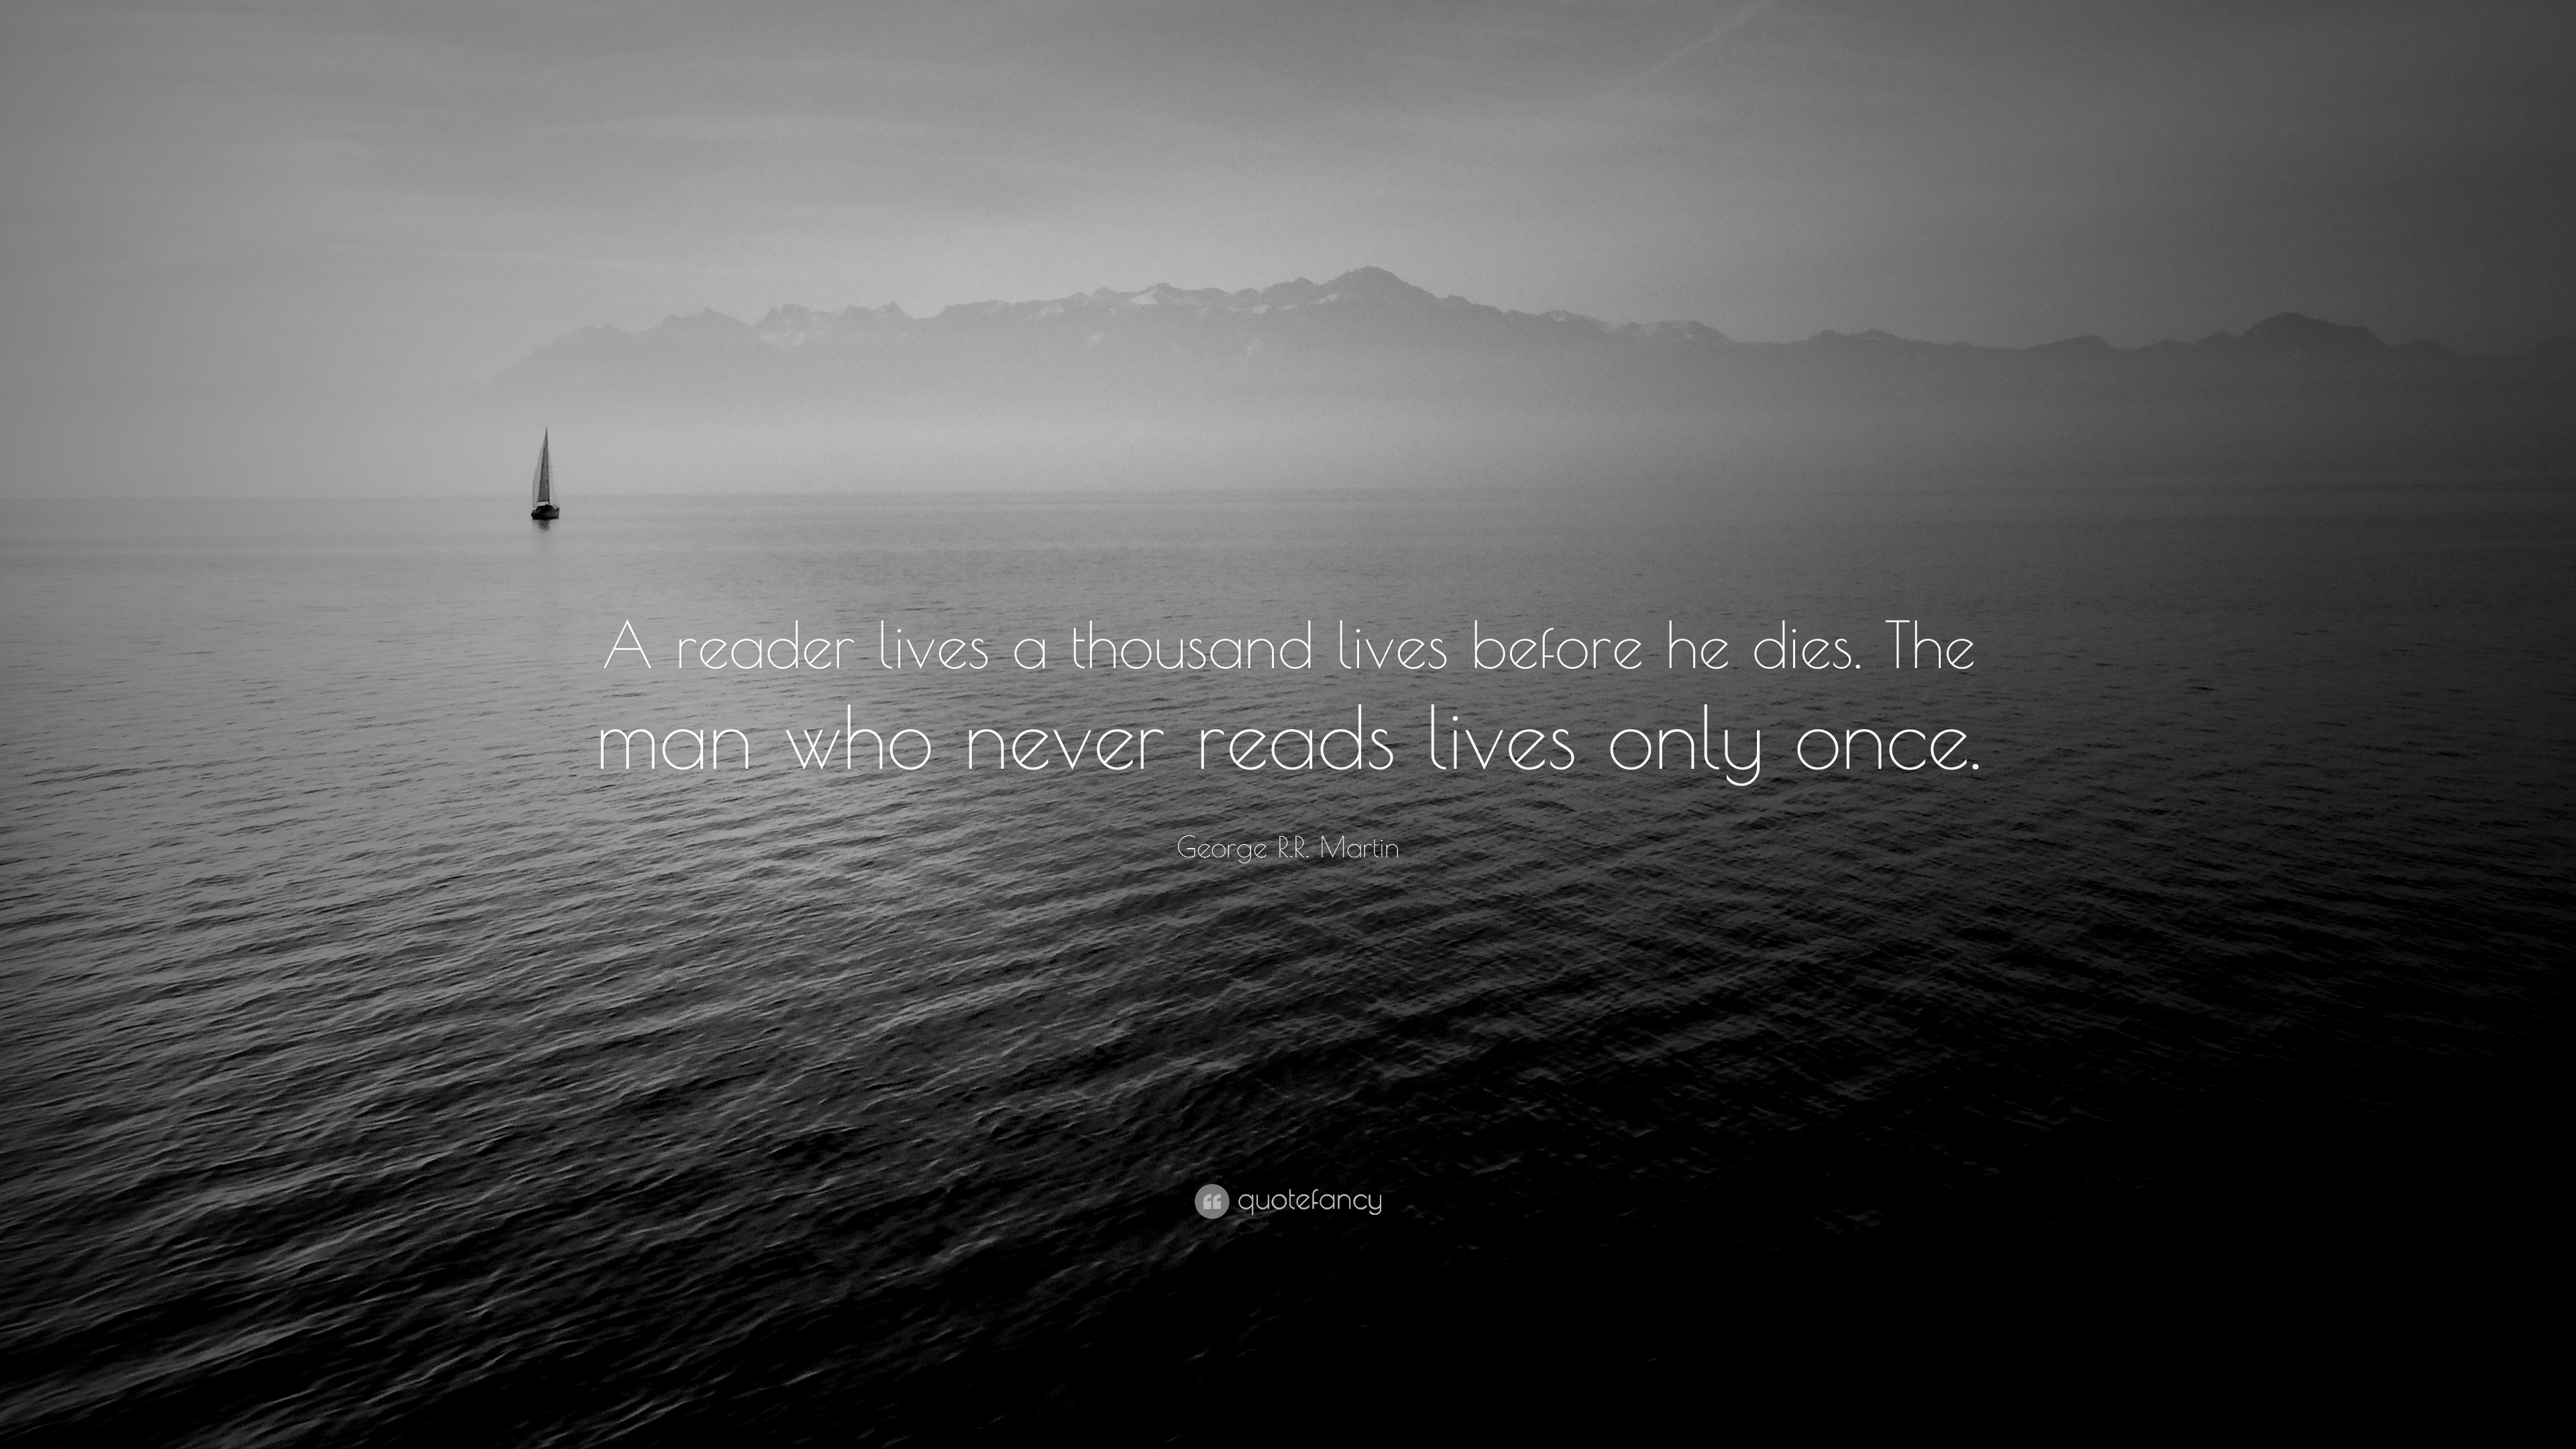 George R.R. Martin Quote: “A reader lives a thousand lives